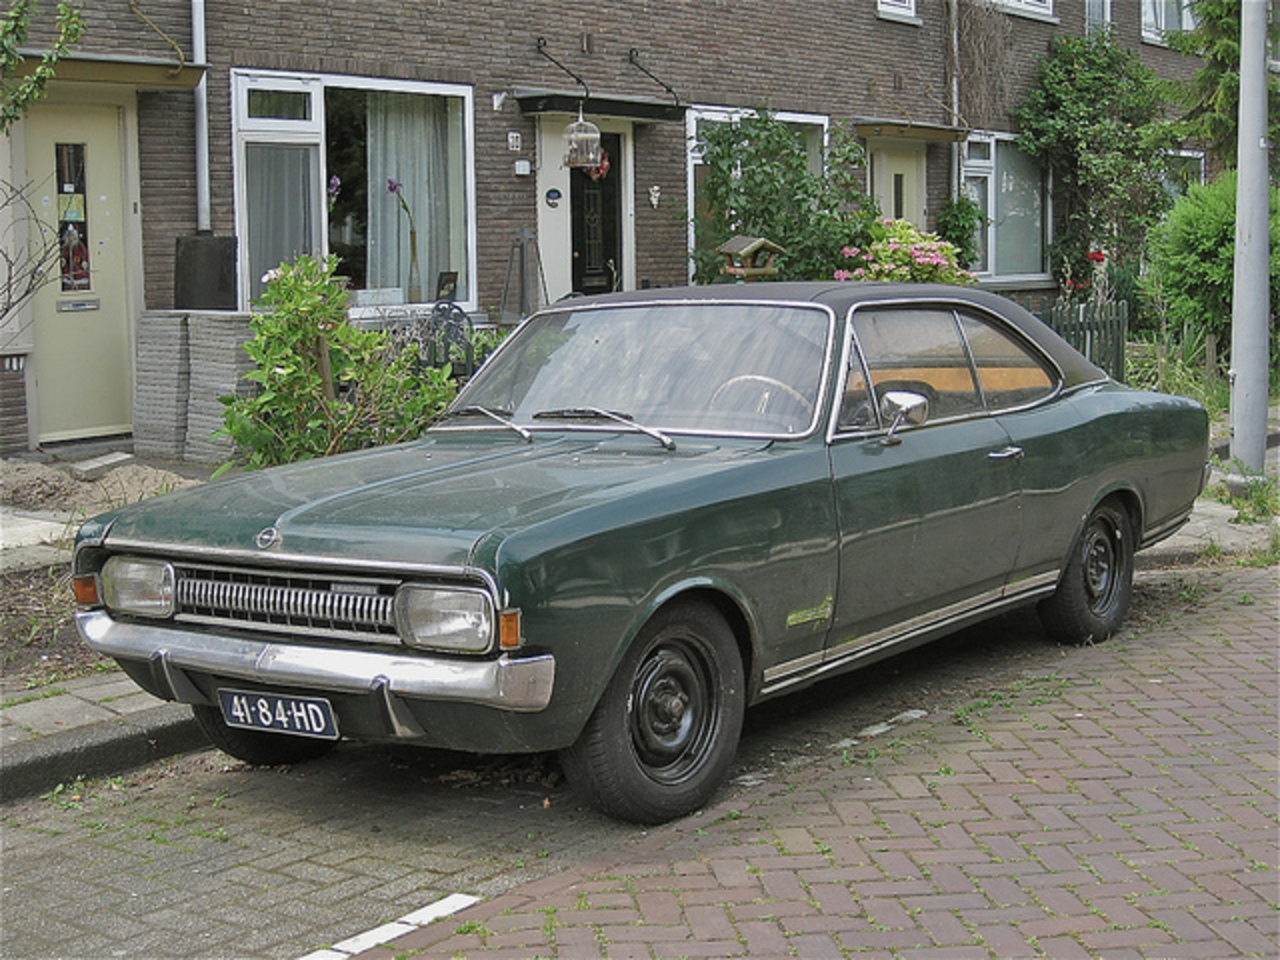 41-84-HD OPEL Commodore 2500/6 coupÃ©, 1968 | Flickr - Photo Sharing!